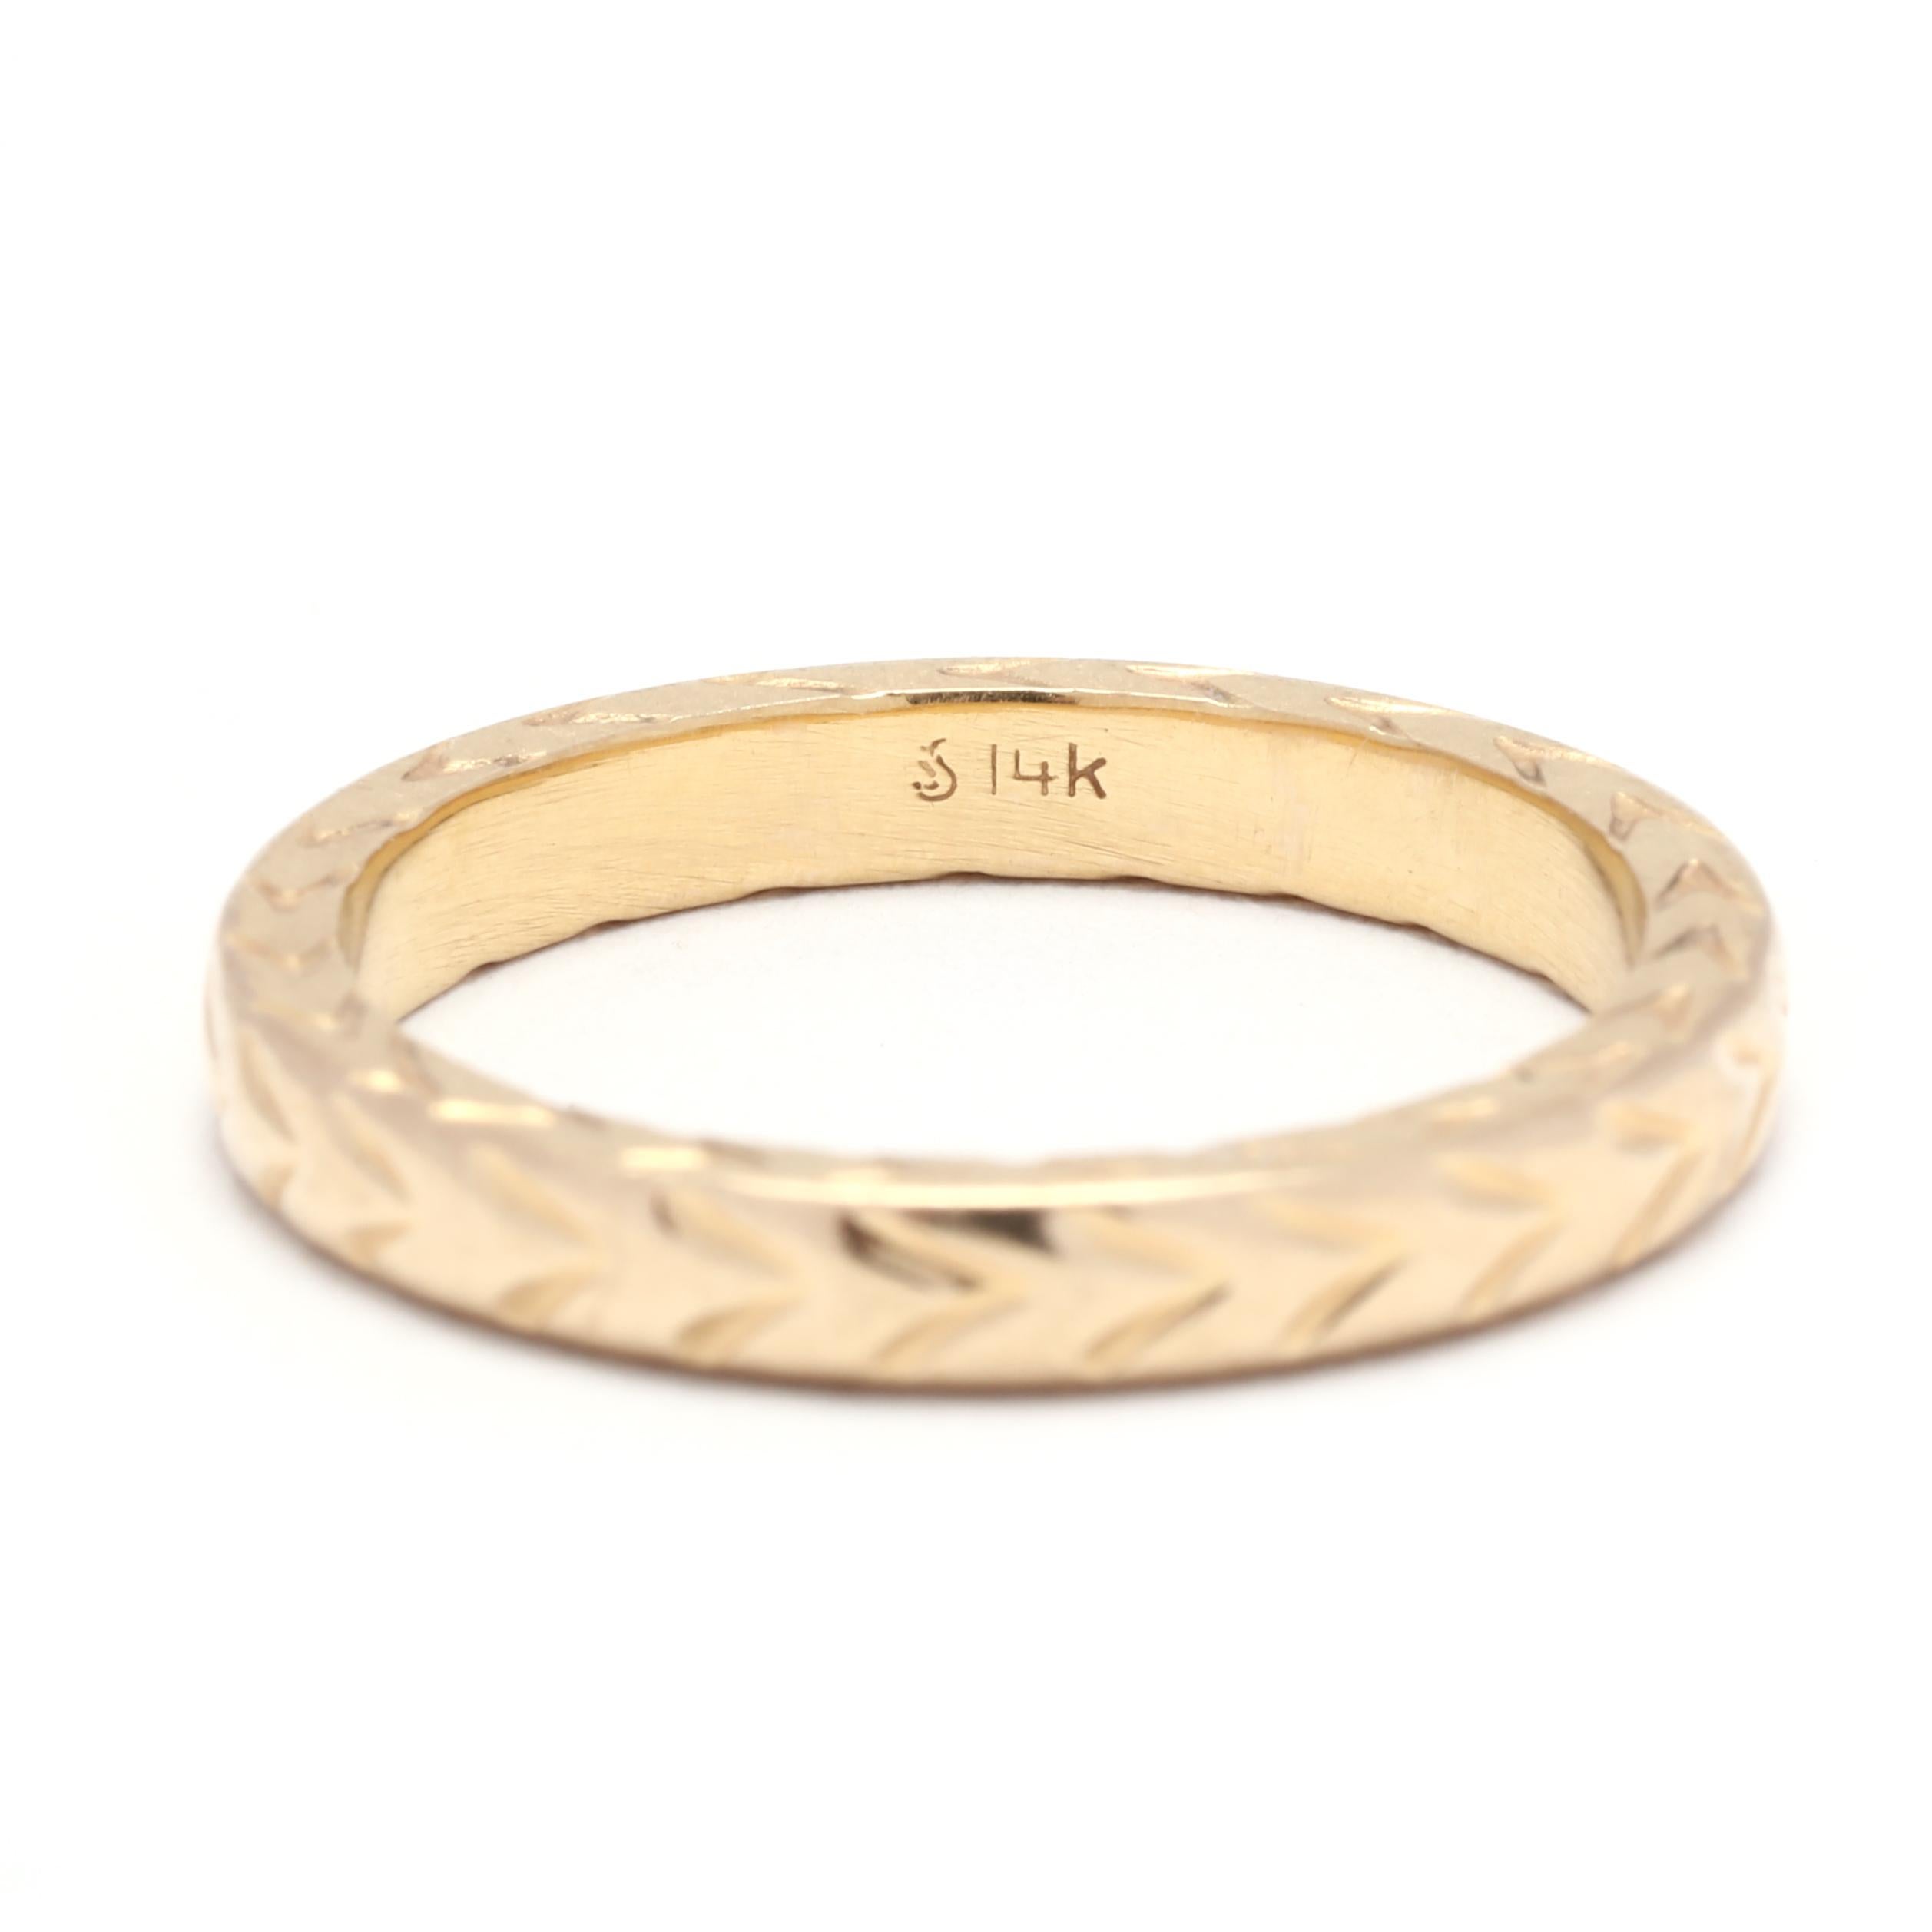 Women's or Men's Thick Engraved Stackable Band, 14K Yellow Gold, Ring Size 5.75, Engraved Gold 